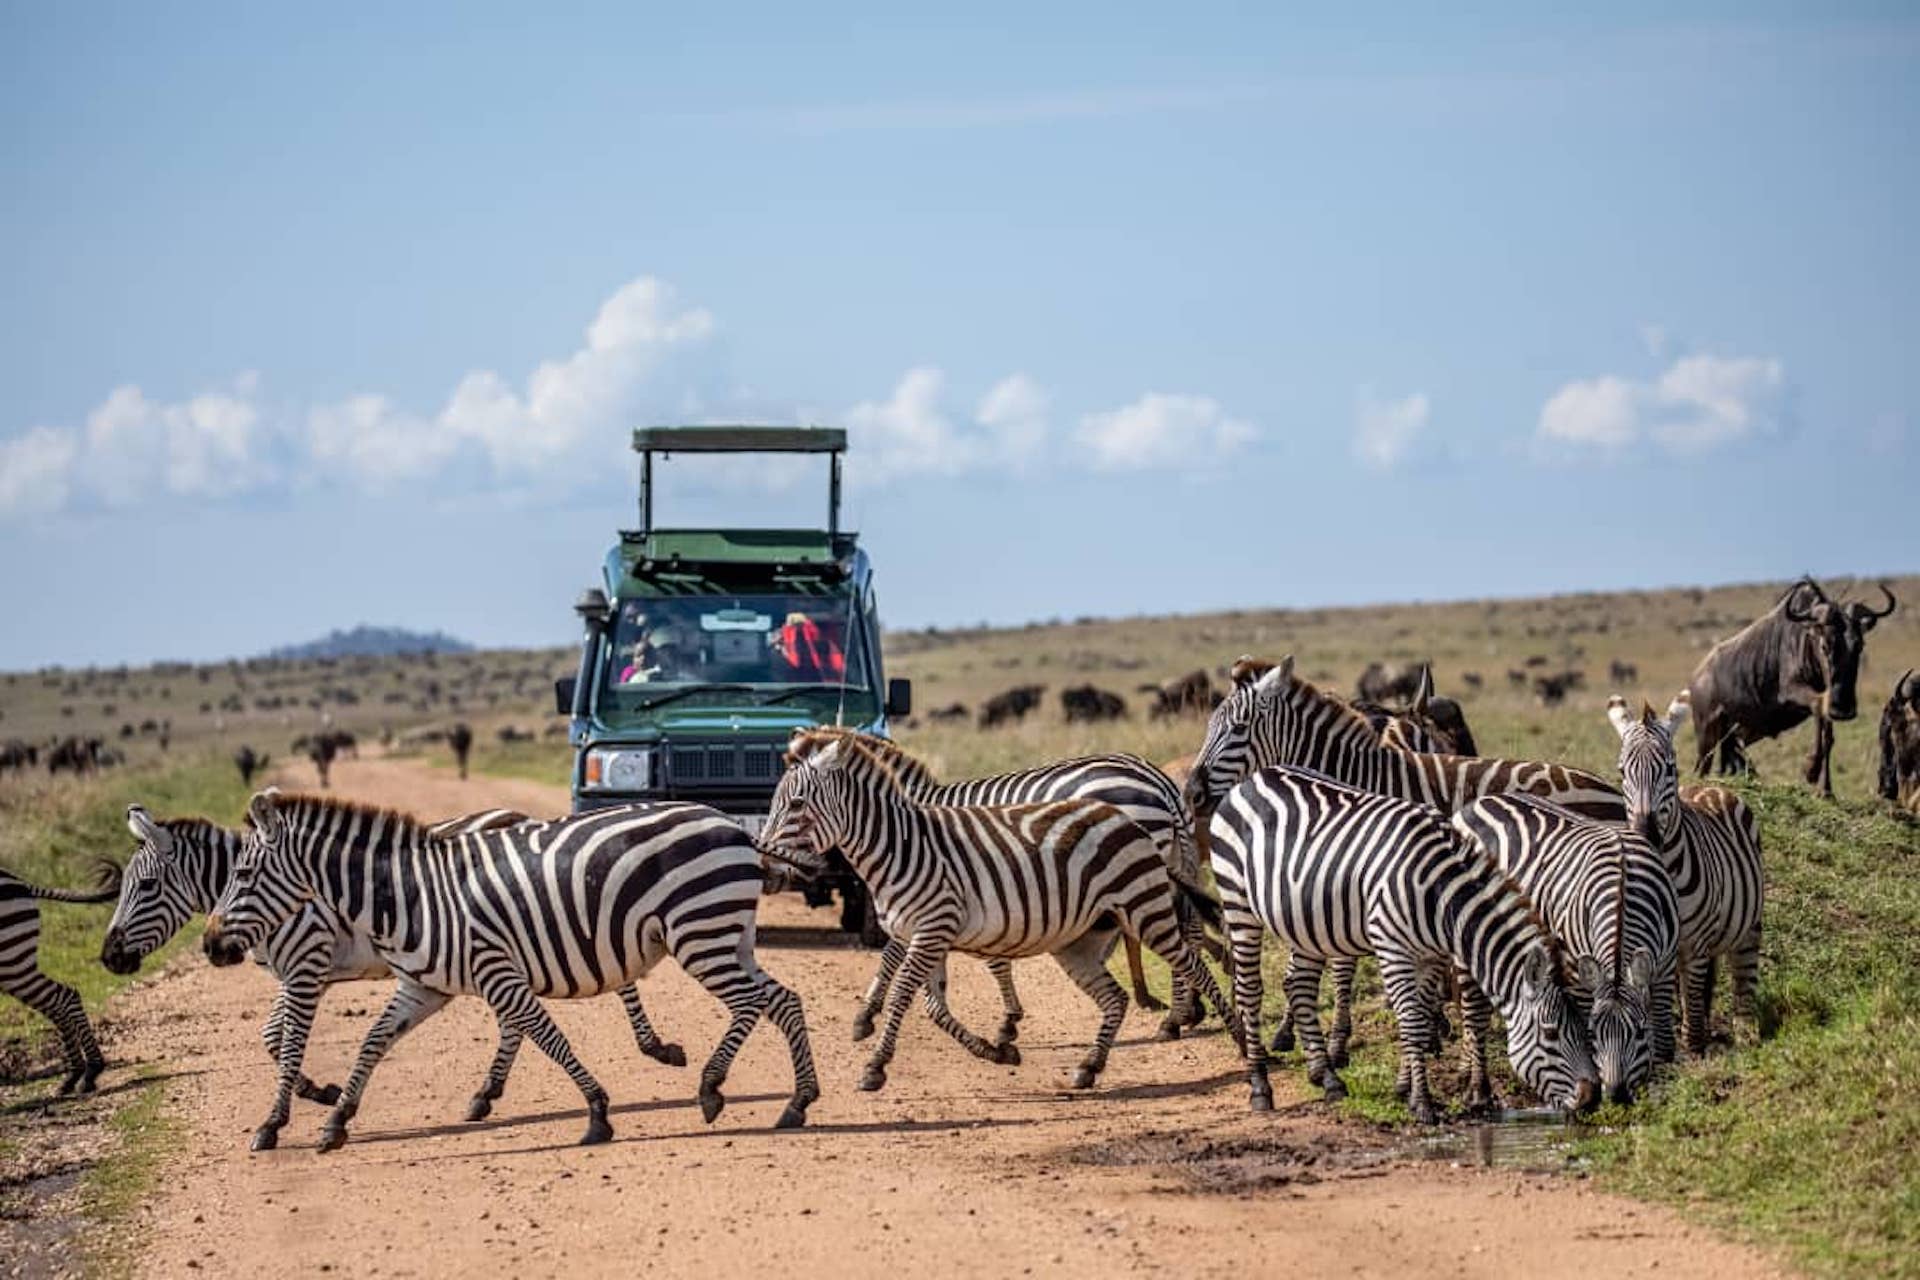 Plan your adventure in Kenya with World Adventure Tours